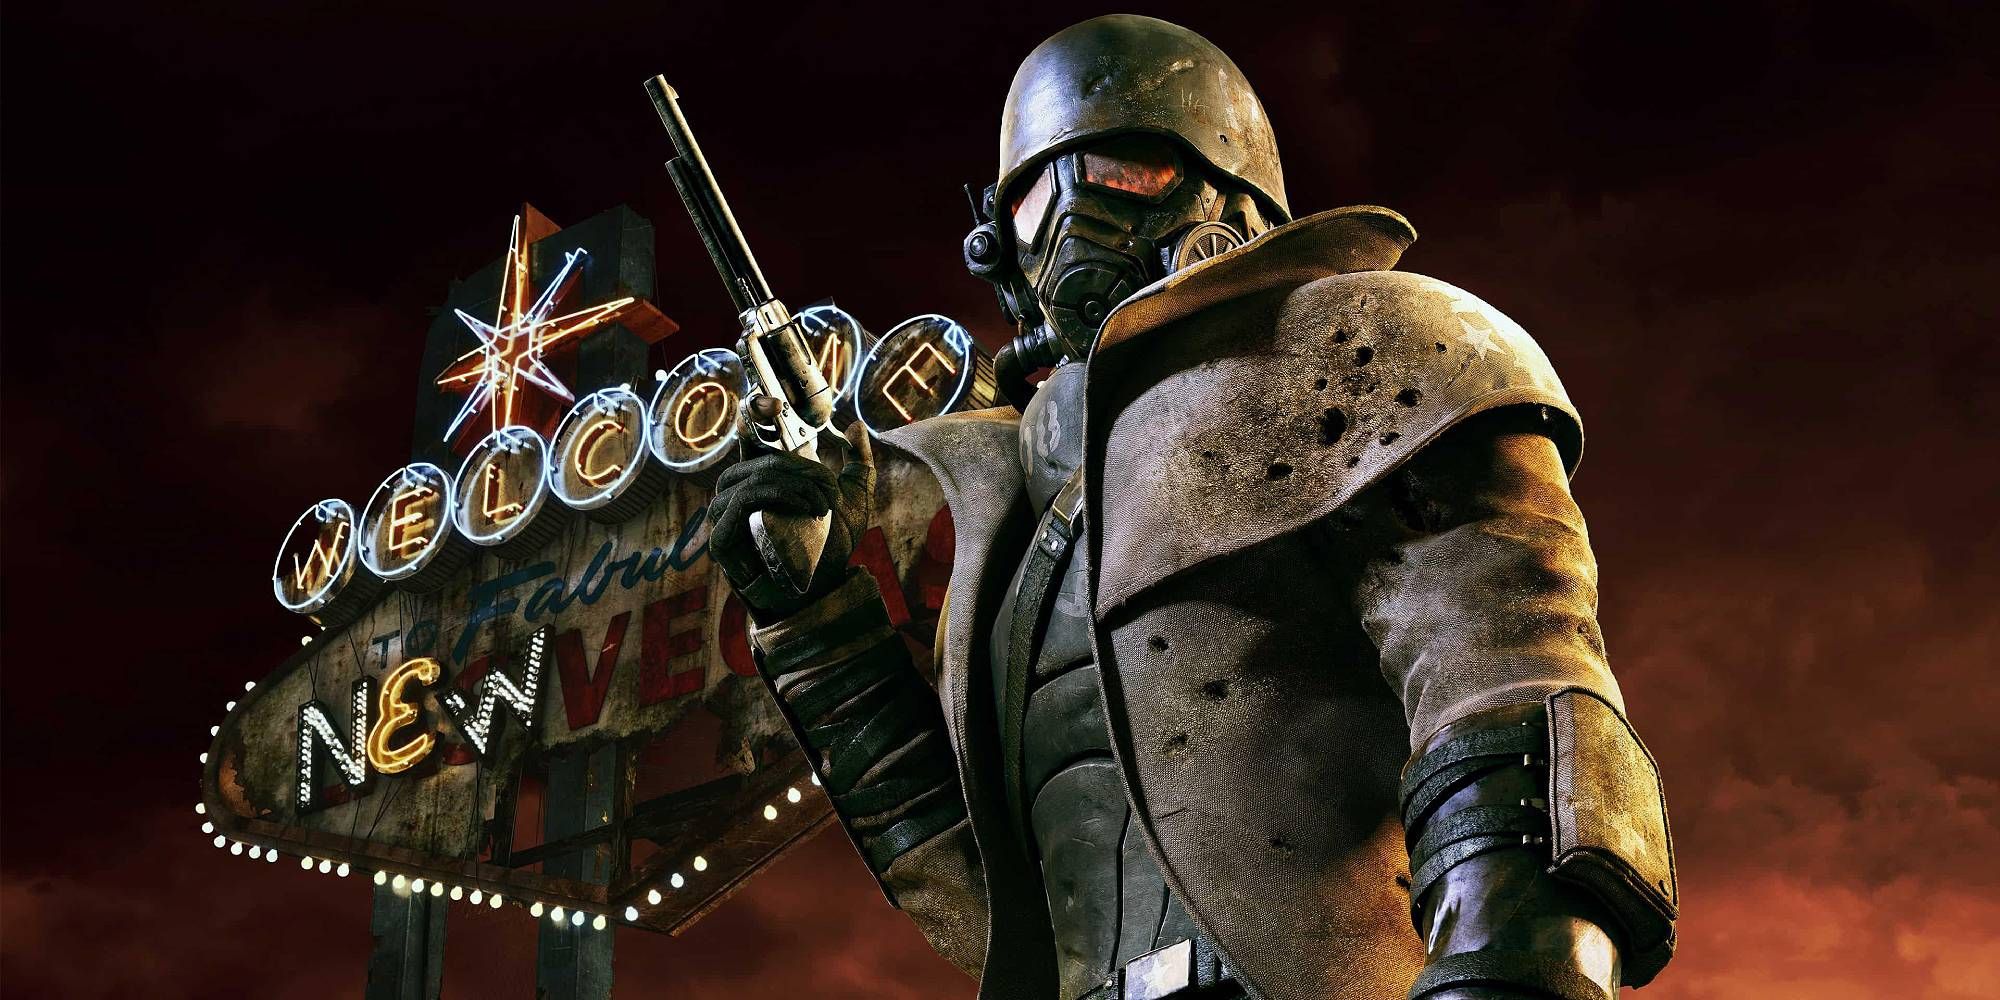 A masked figure stands by a sign which says Welcome to Fallout New Vegas